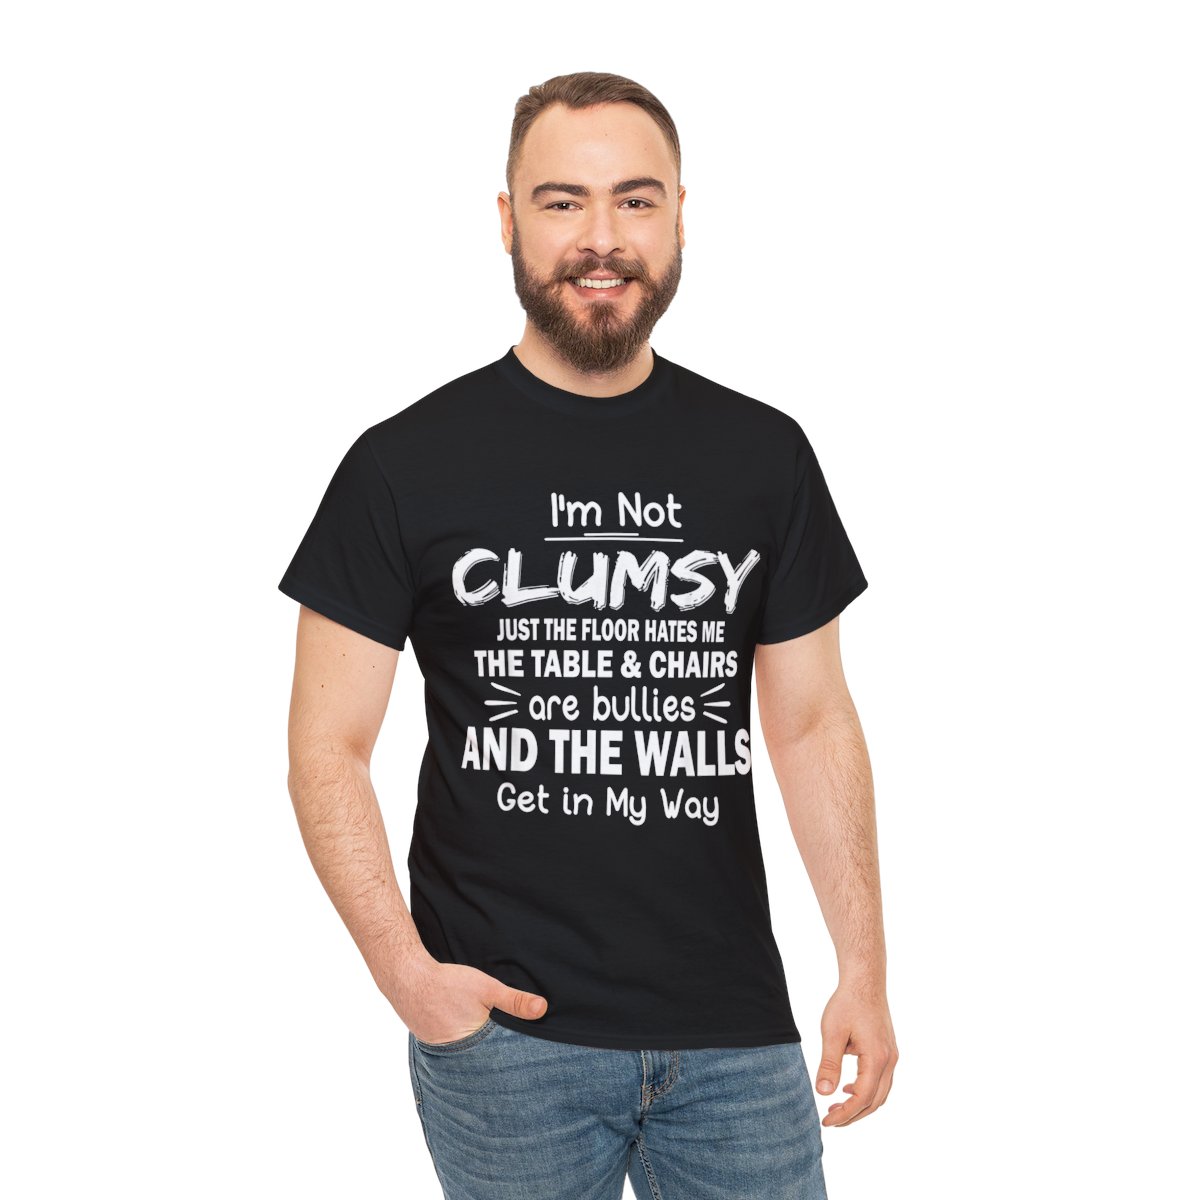 I’m Not Clumsy Funny Sayings Sarcastic Graphic T-Shirt